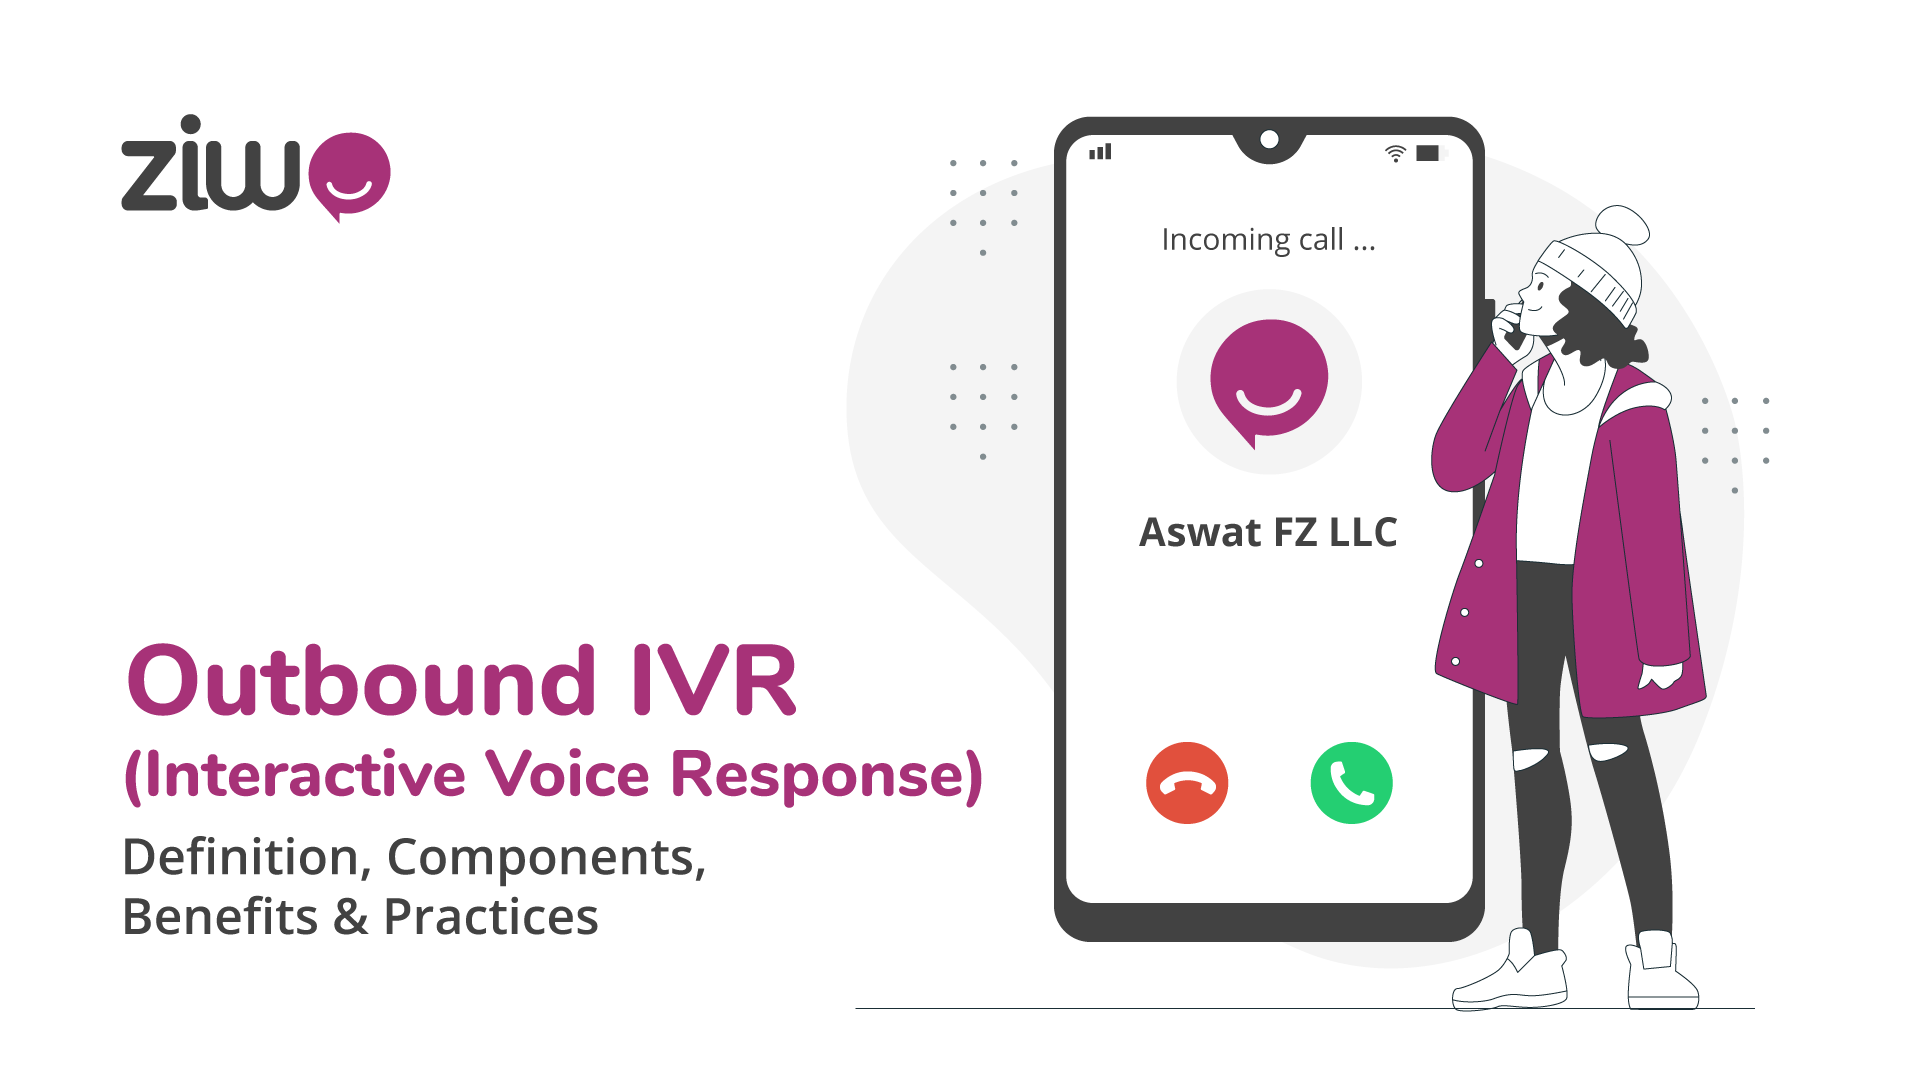 Outbound IVR definition and benefits: Incoming voice call of aswat FZ LLC